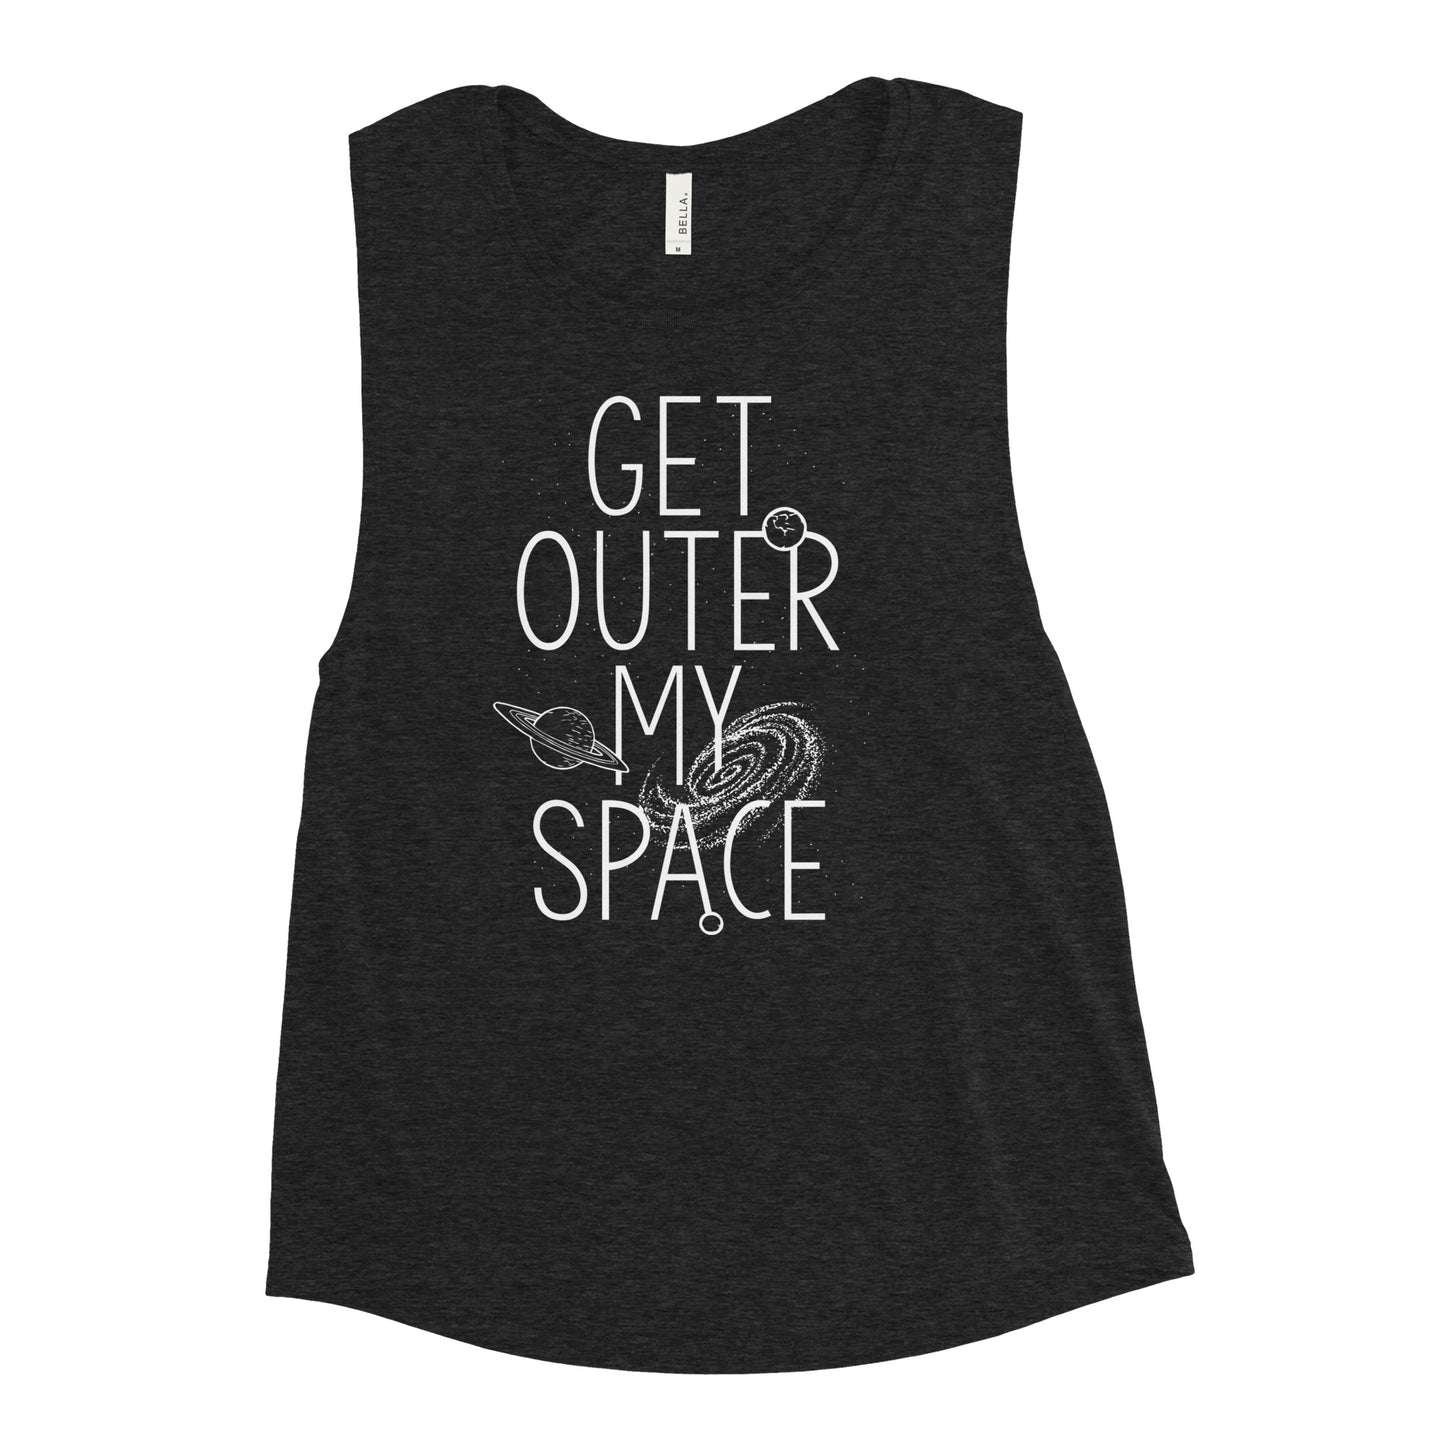 Get Outer My Space Women's Muscle Tank